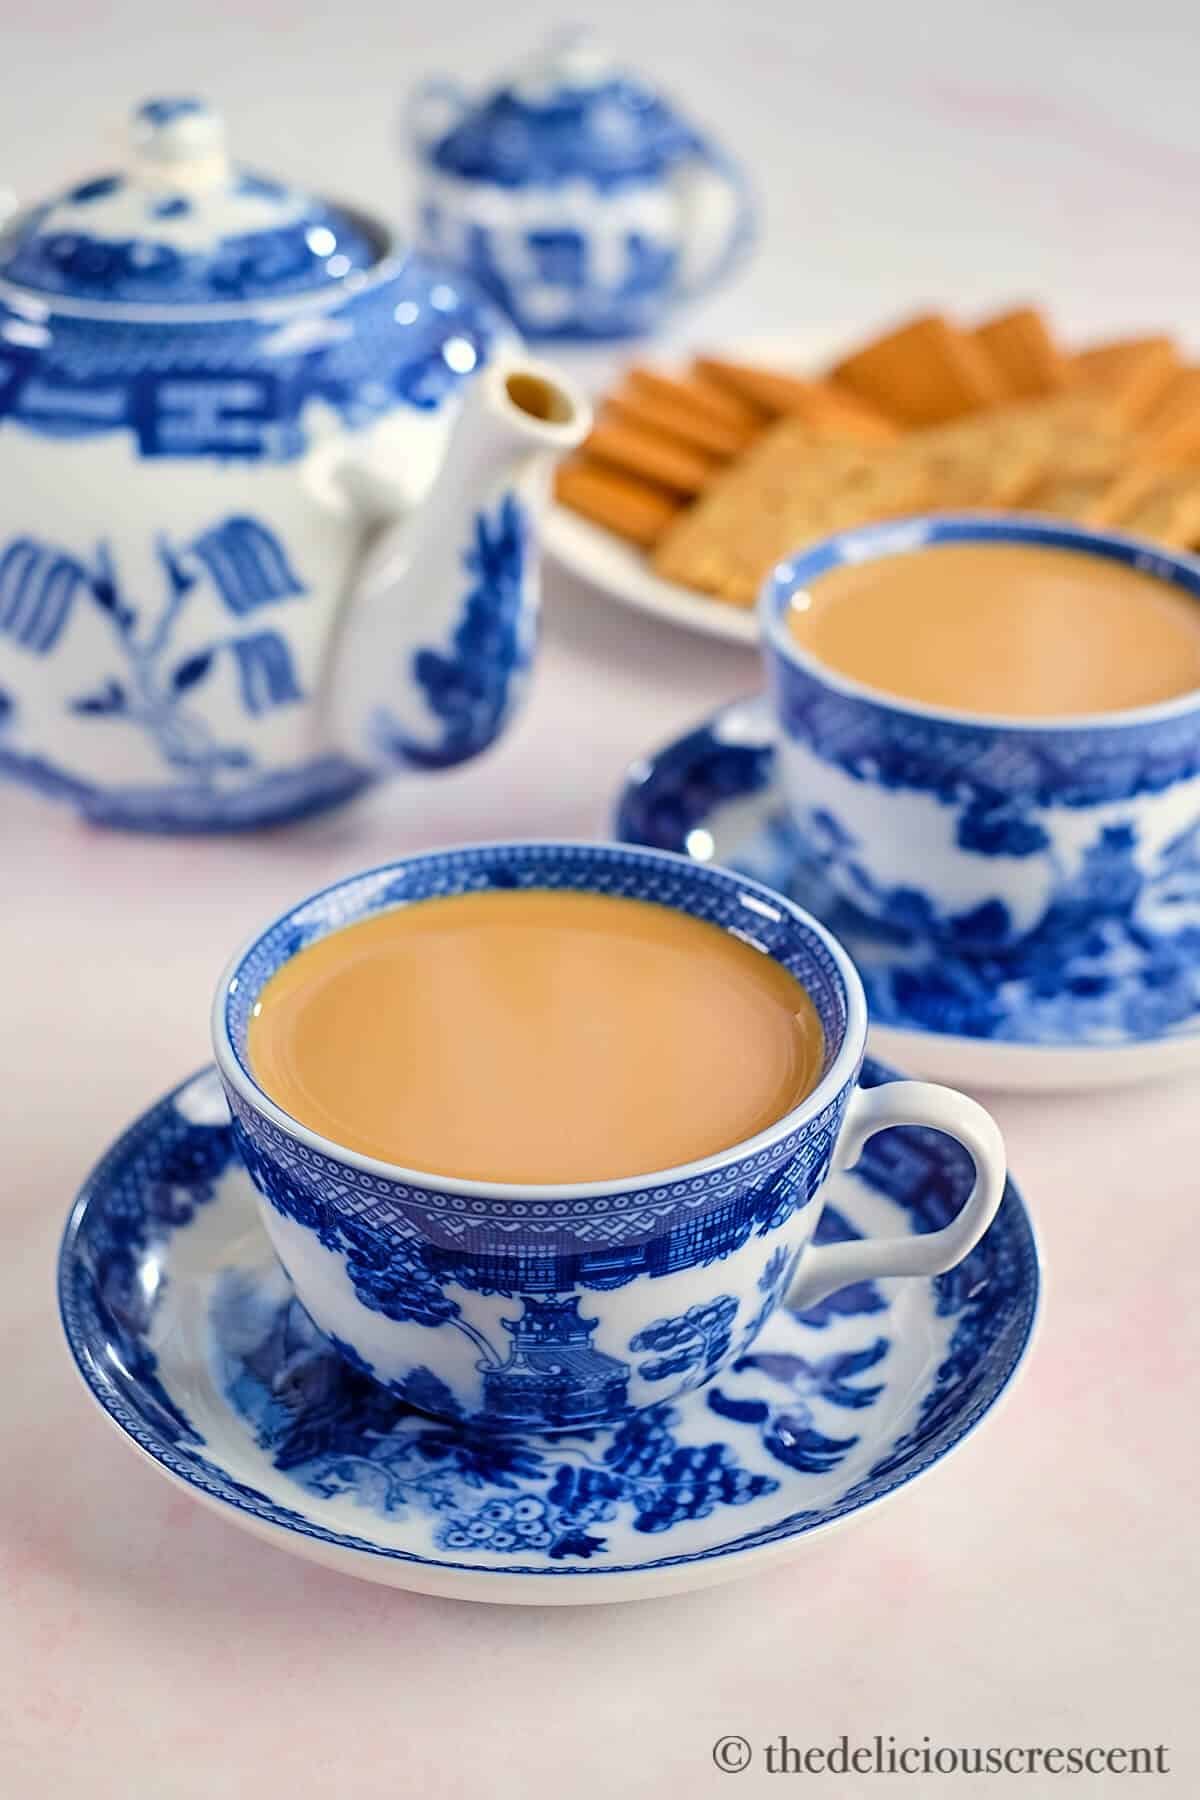 https://www.thedeliciouscrescent.com/wp-content/uploads/2022/05/Masala-Chai-2.jpg